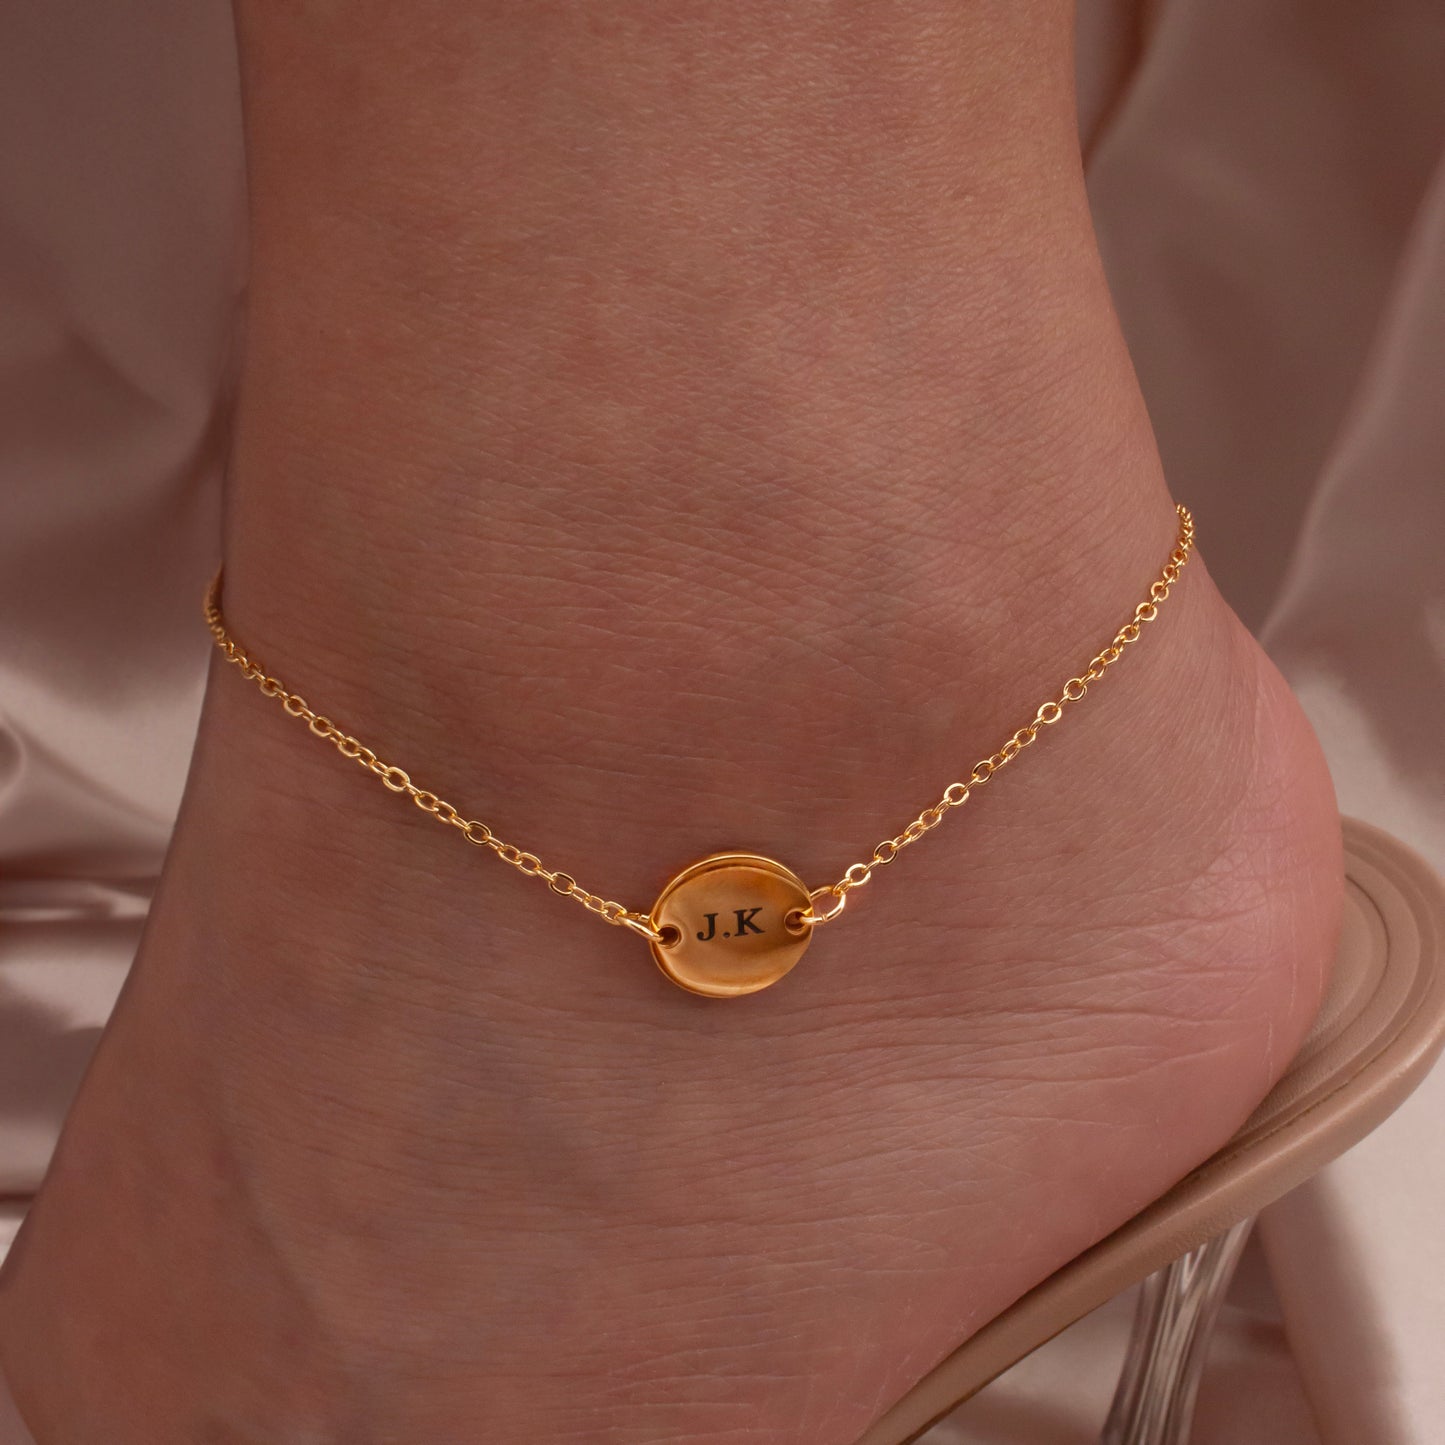 Personalized coin disc anklet summer anklets beach surf ankle bracelets gift for her 16K gold plated